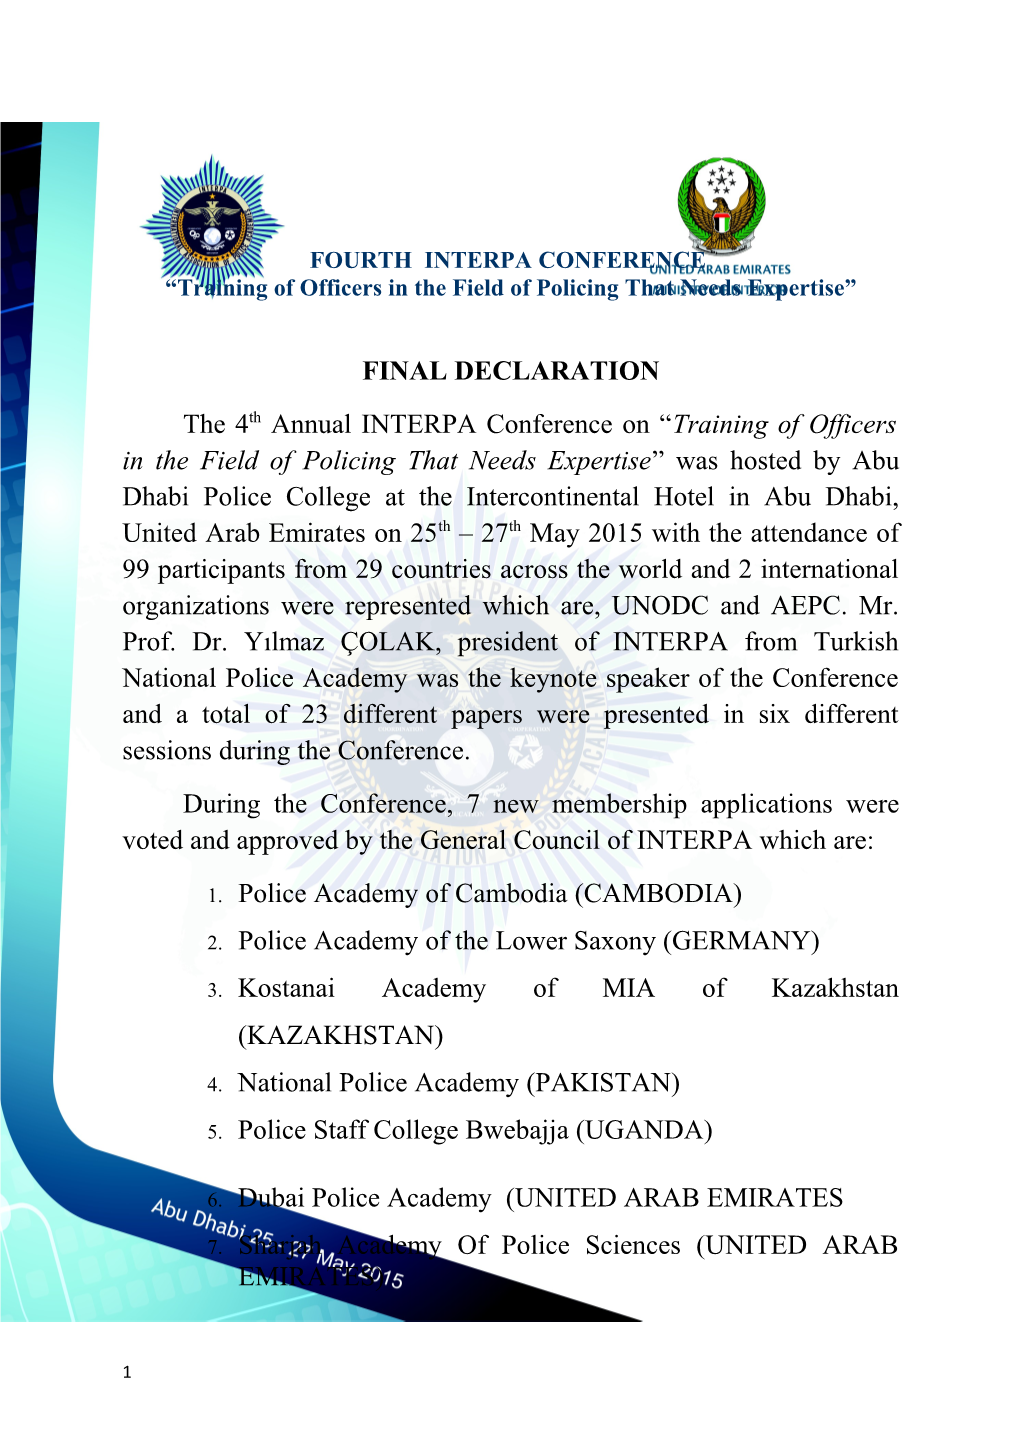 Training of Officers in the Field of Policing That Needs Expertise